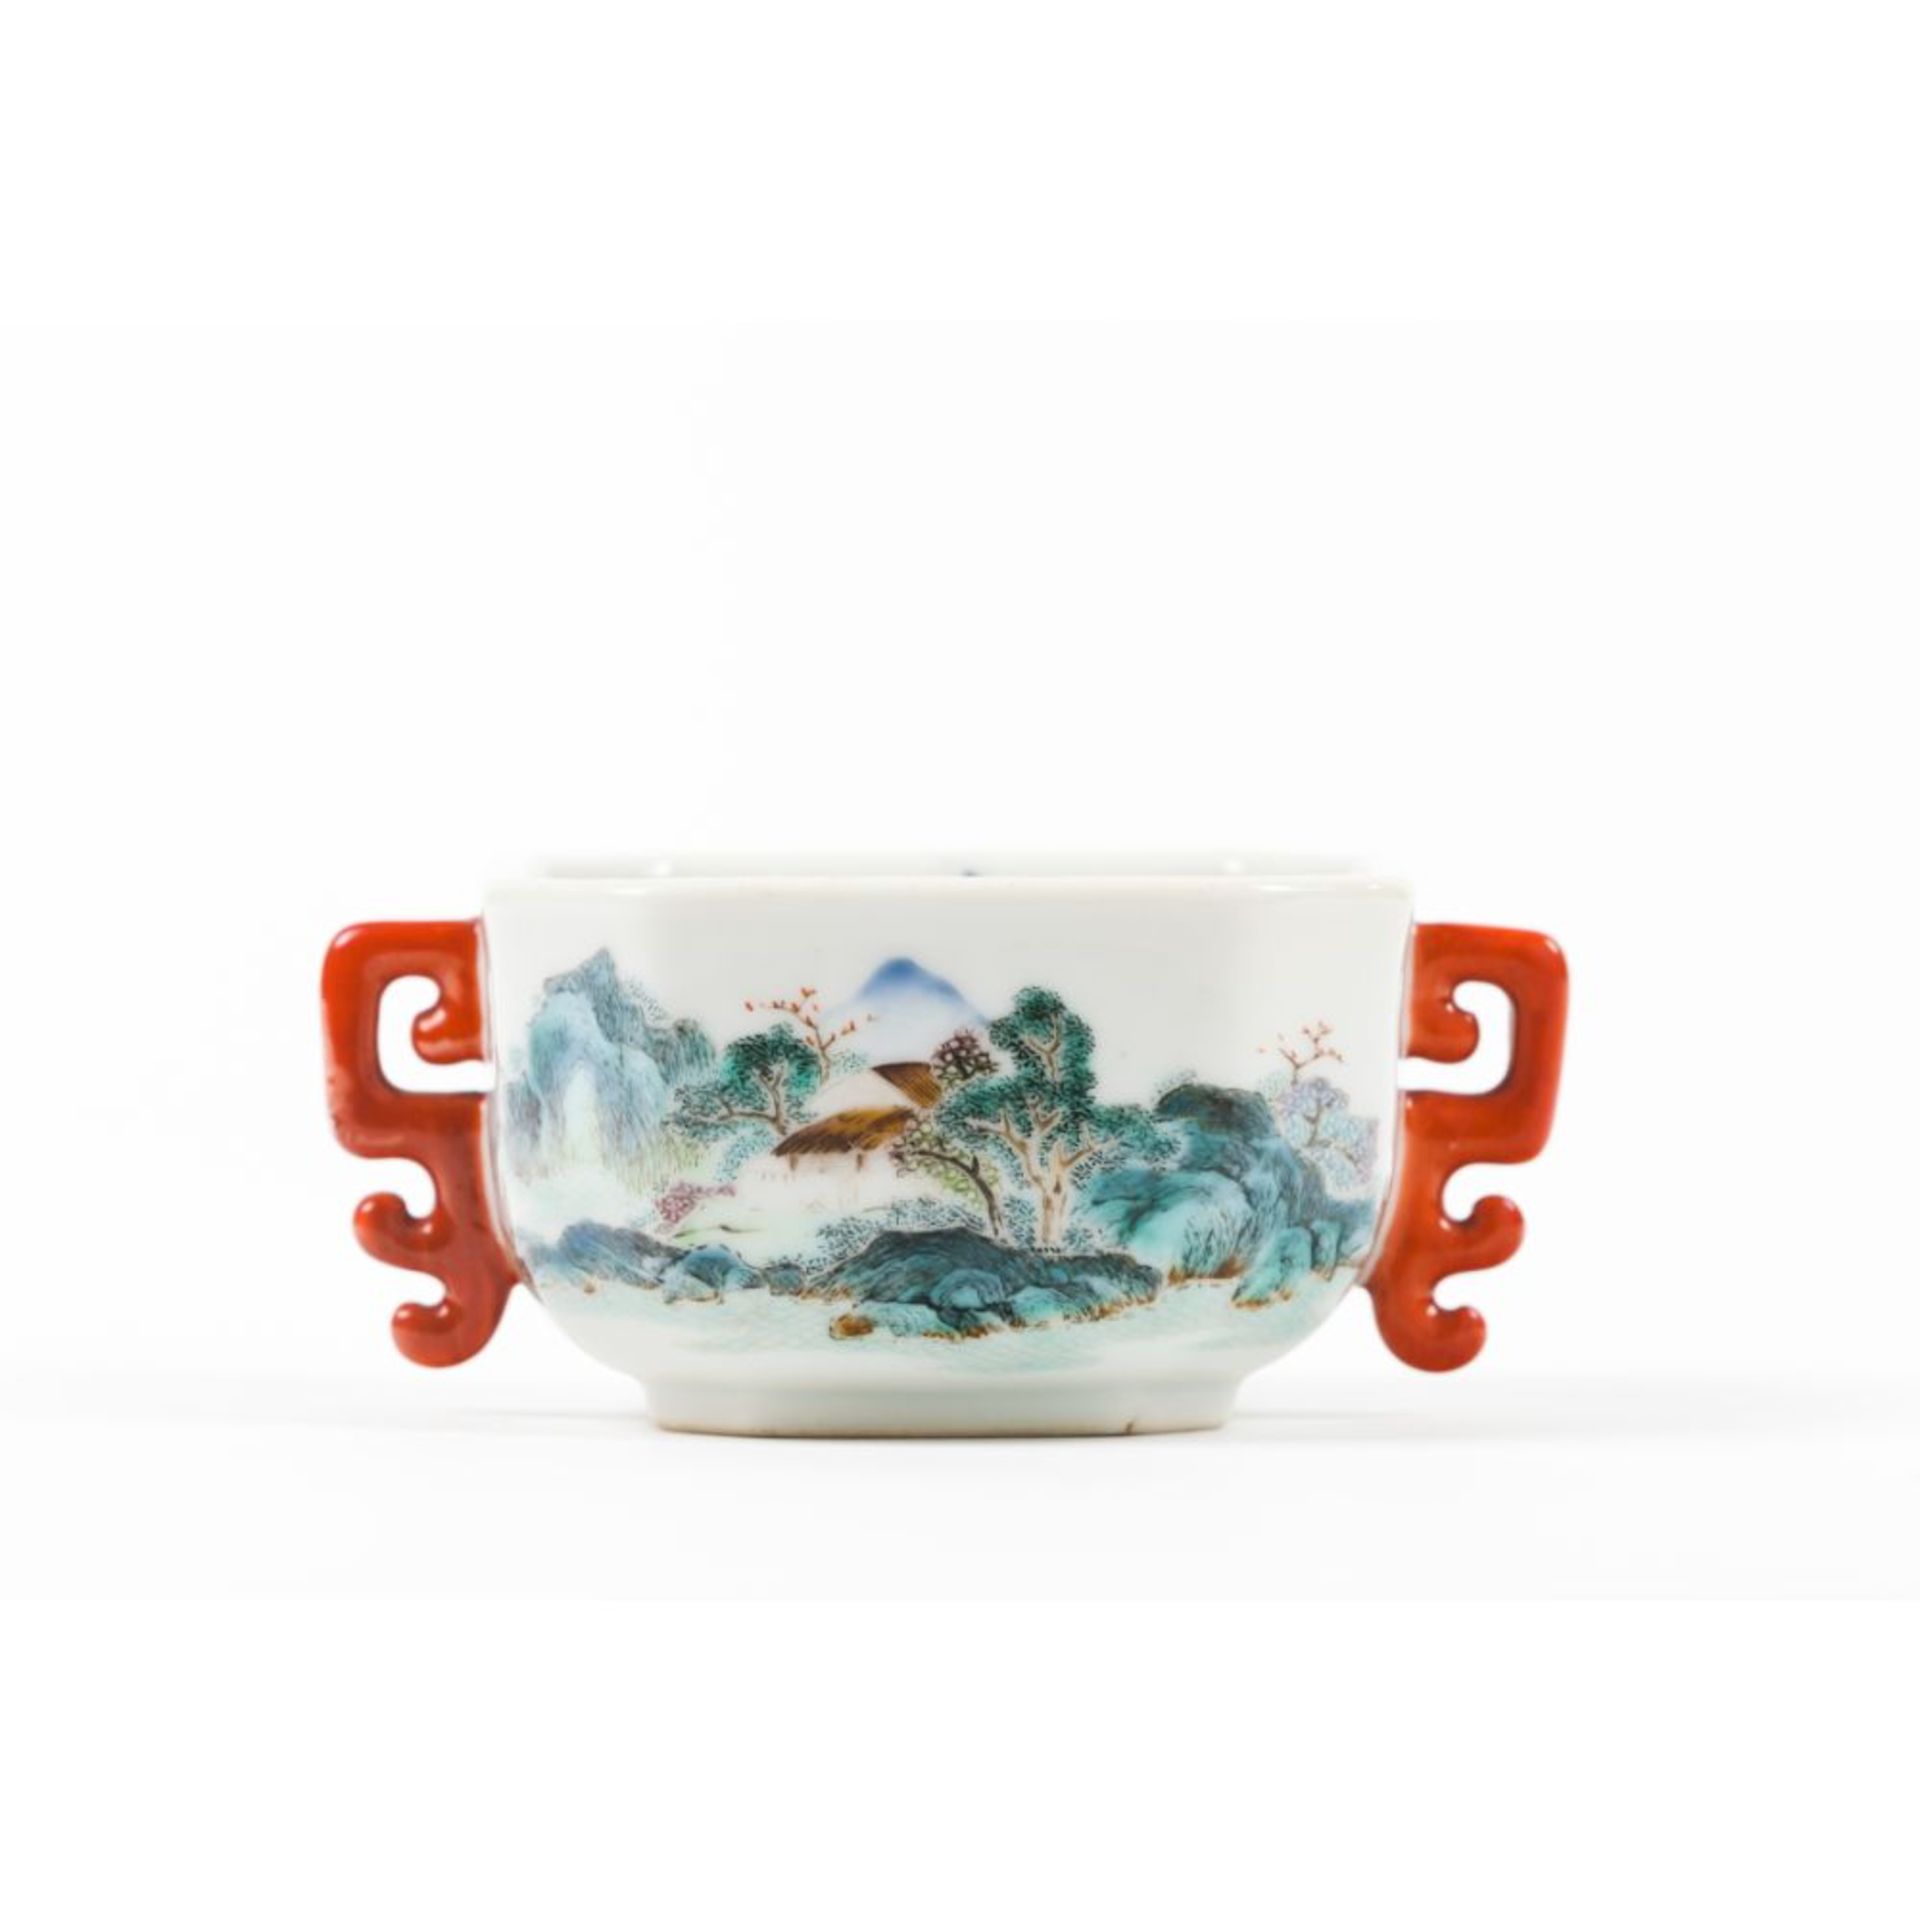 A rare Famille-Rose 'Landscape' cup and cover